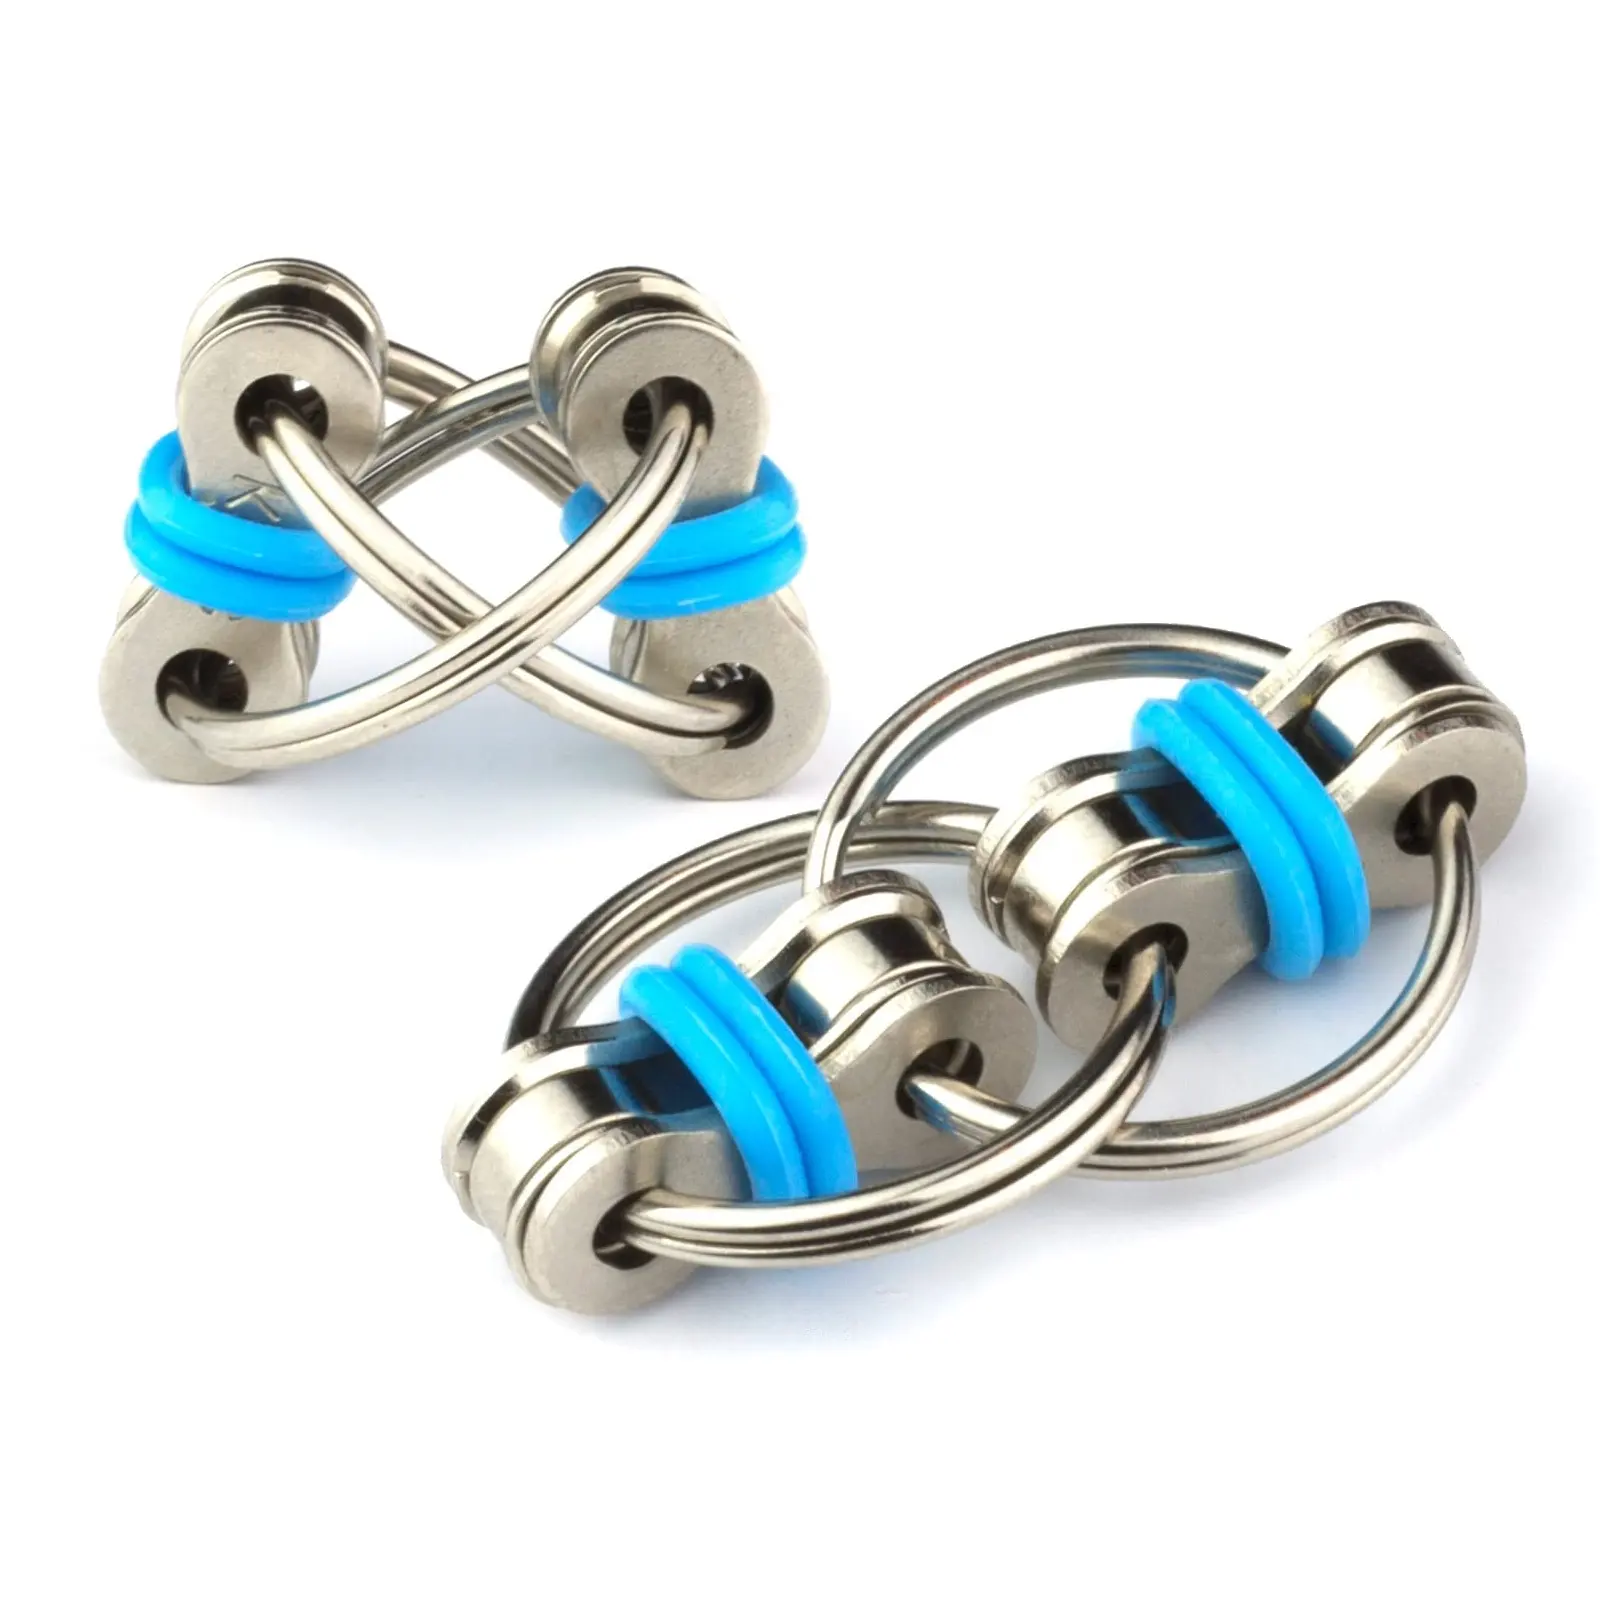 Hot Selling Toy Decompress Flippy Chain Fidget Toy Stress Reducer Perfect Fidget Toys For ADD ADHD Anxiety and Autism